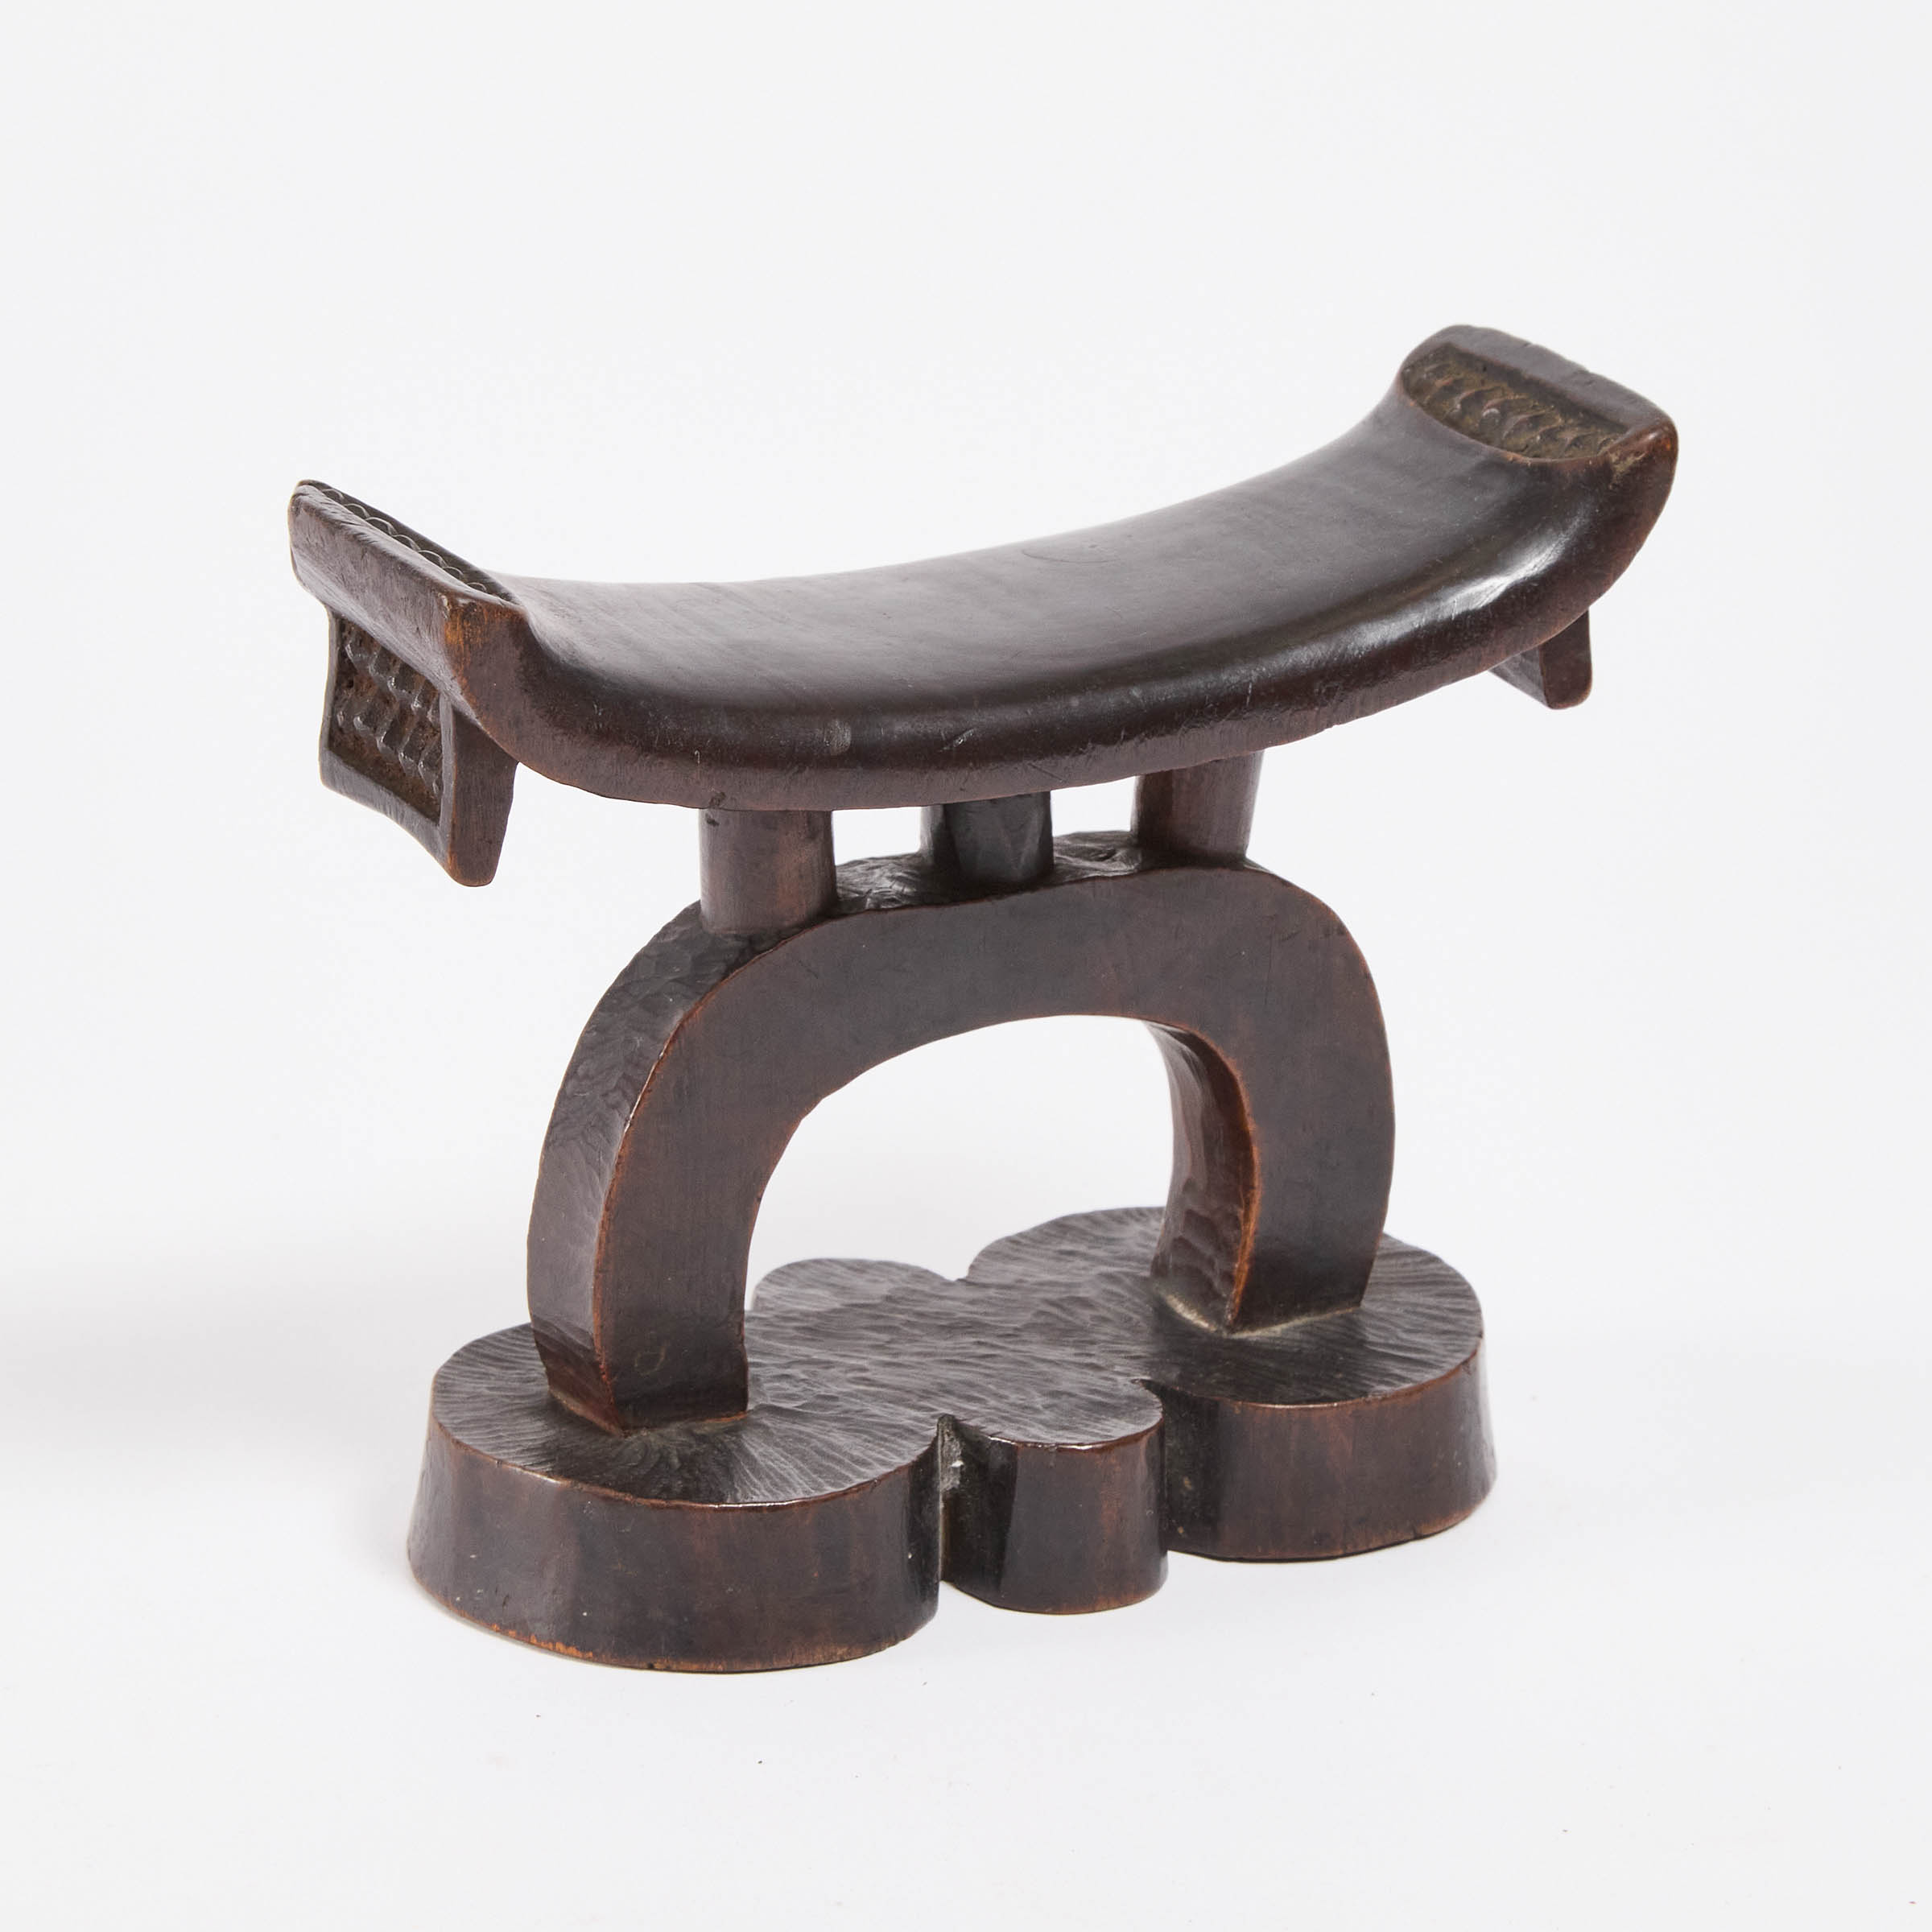 Southern African Headrest, possibly